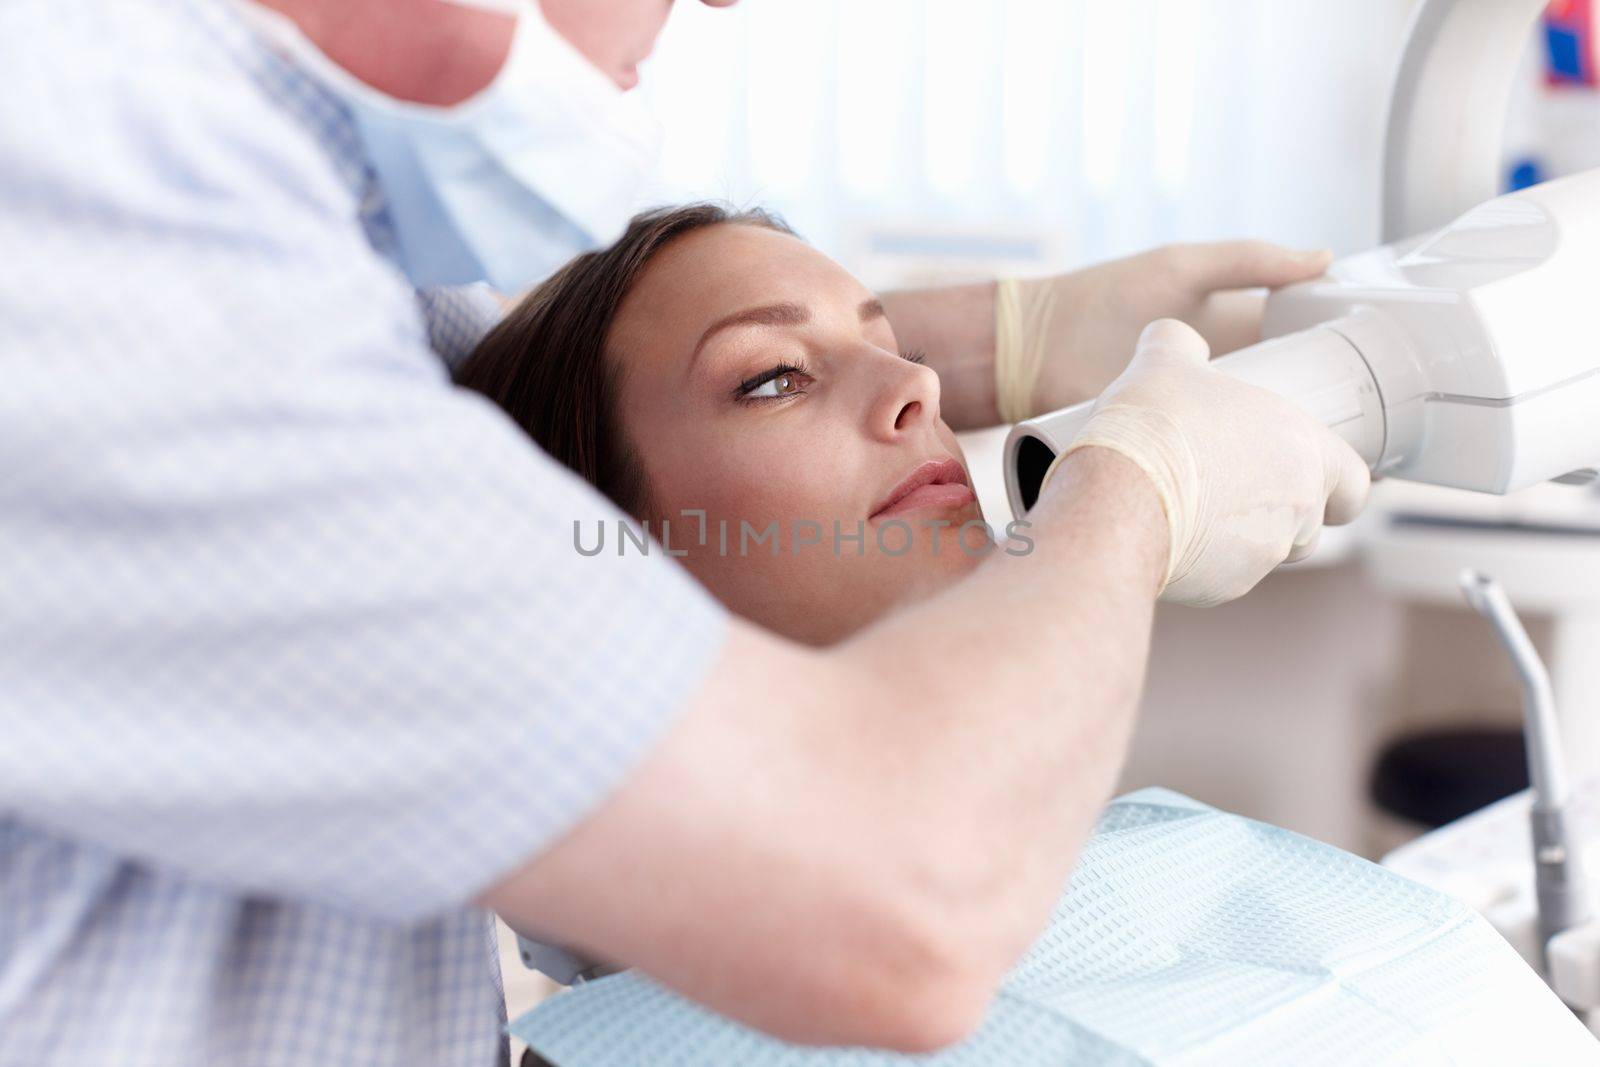 Female patient going through dental treatment. Portrait of female patient going through dental treatment in clinic